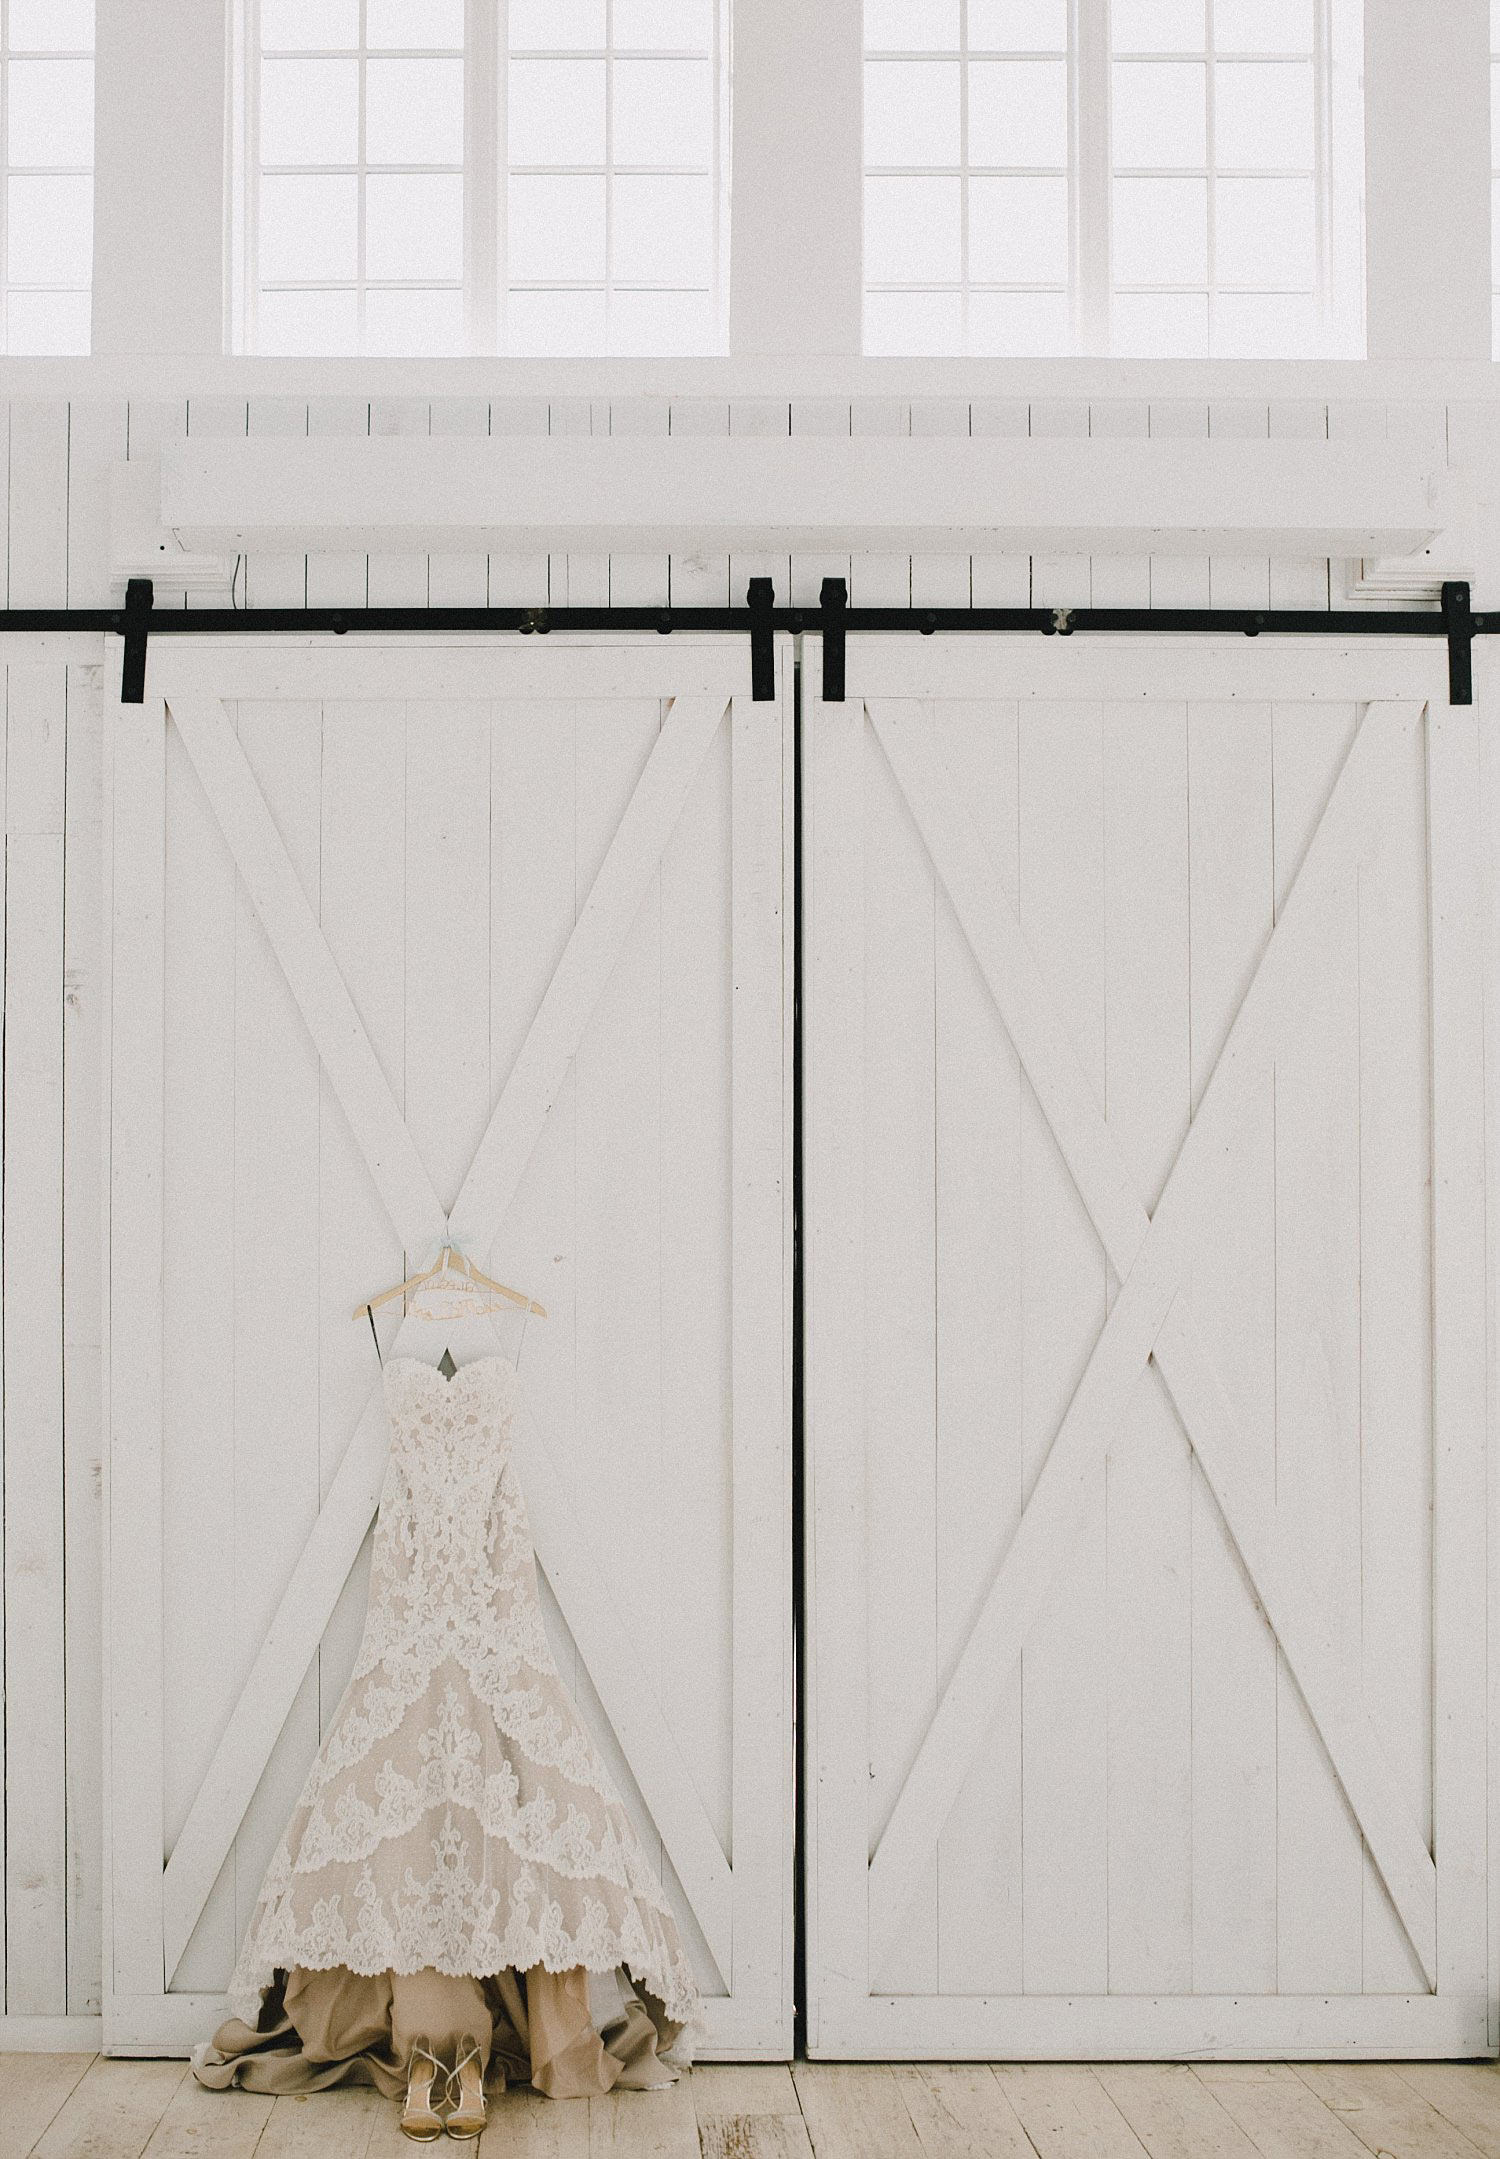 White Sparrow Barn wedding dress hanging on white barn doors with windows above